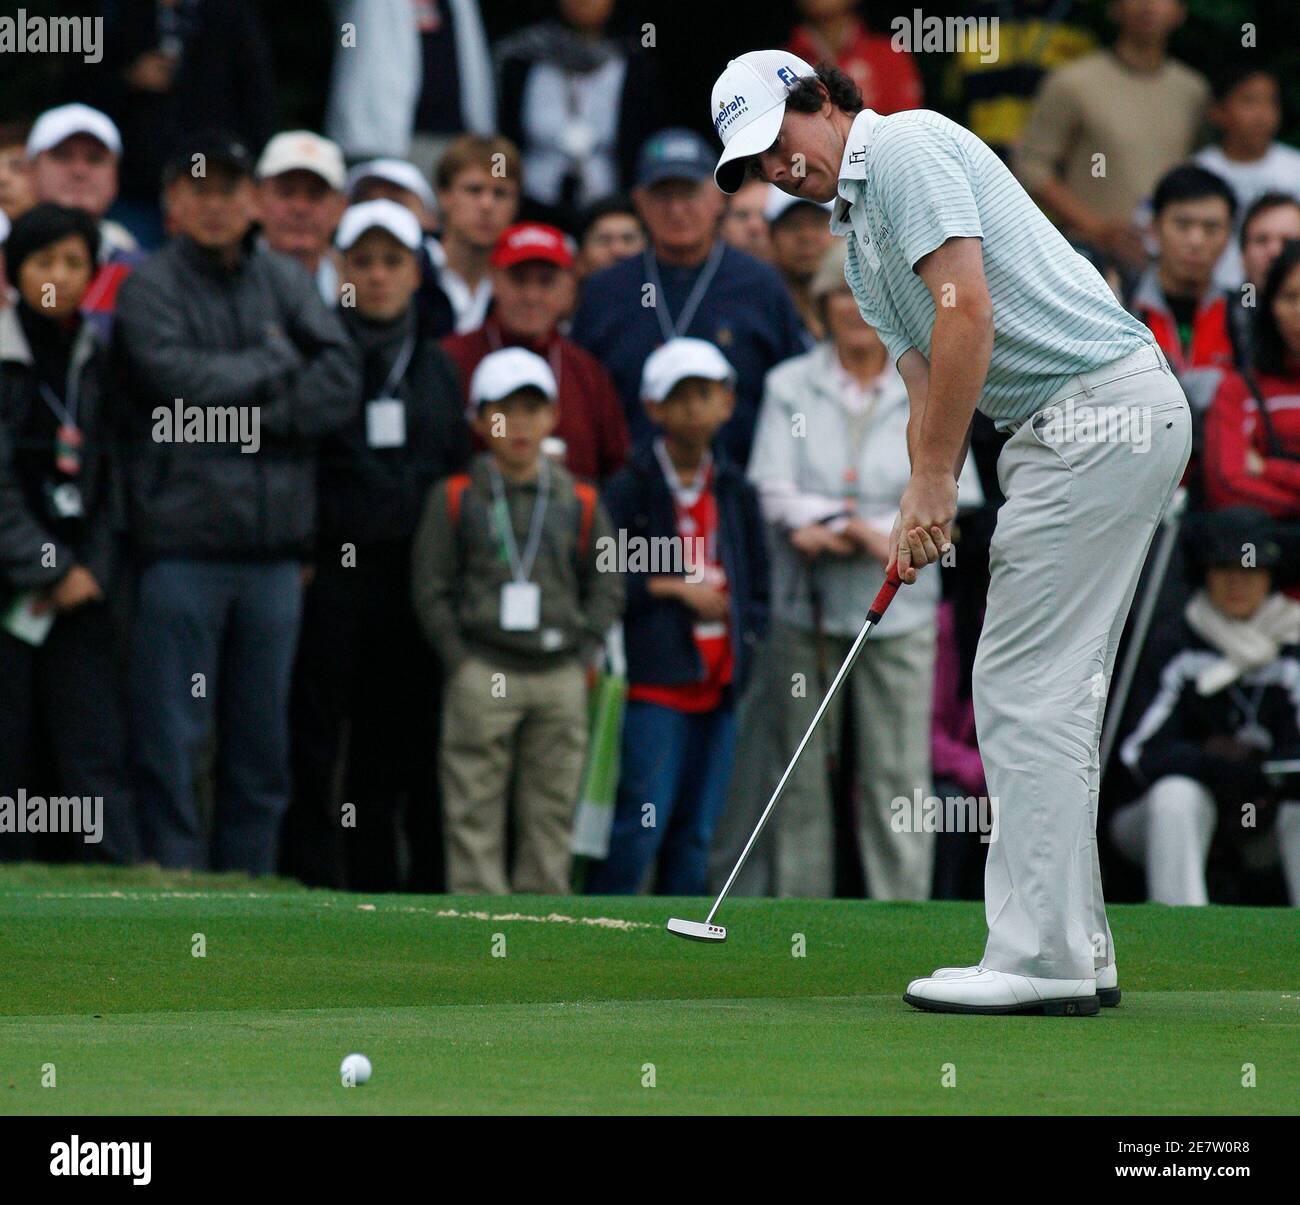 Rory McIlroy of Northern Ireland putts on the 13th green during the final round of the Hong Kong Open golf tournament November 15, 2009. REUTERS/Tyrone Siu (CHINA SPORT GOLF) Stock Photo